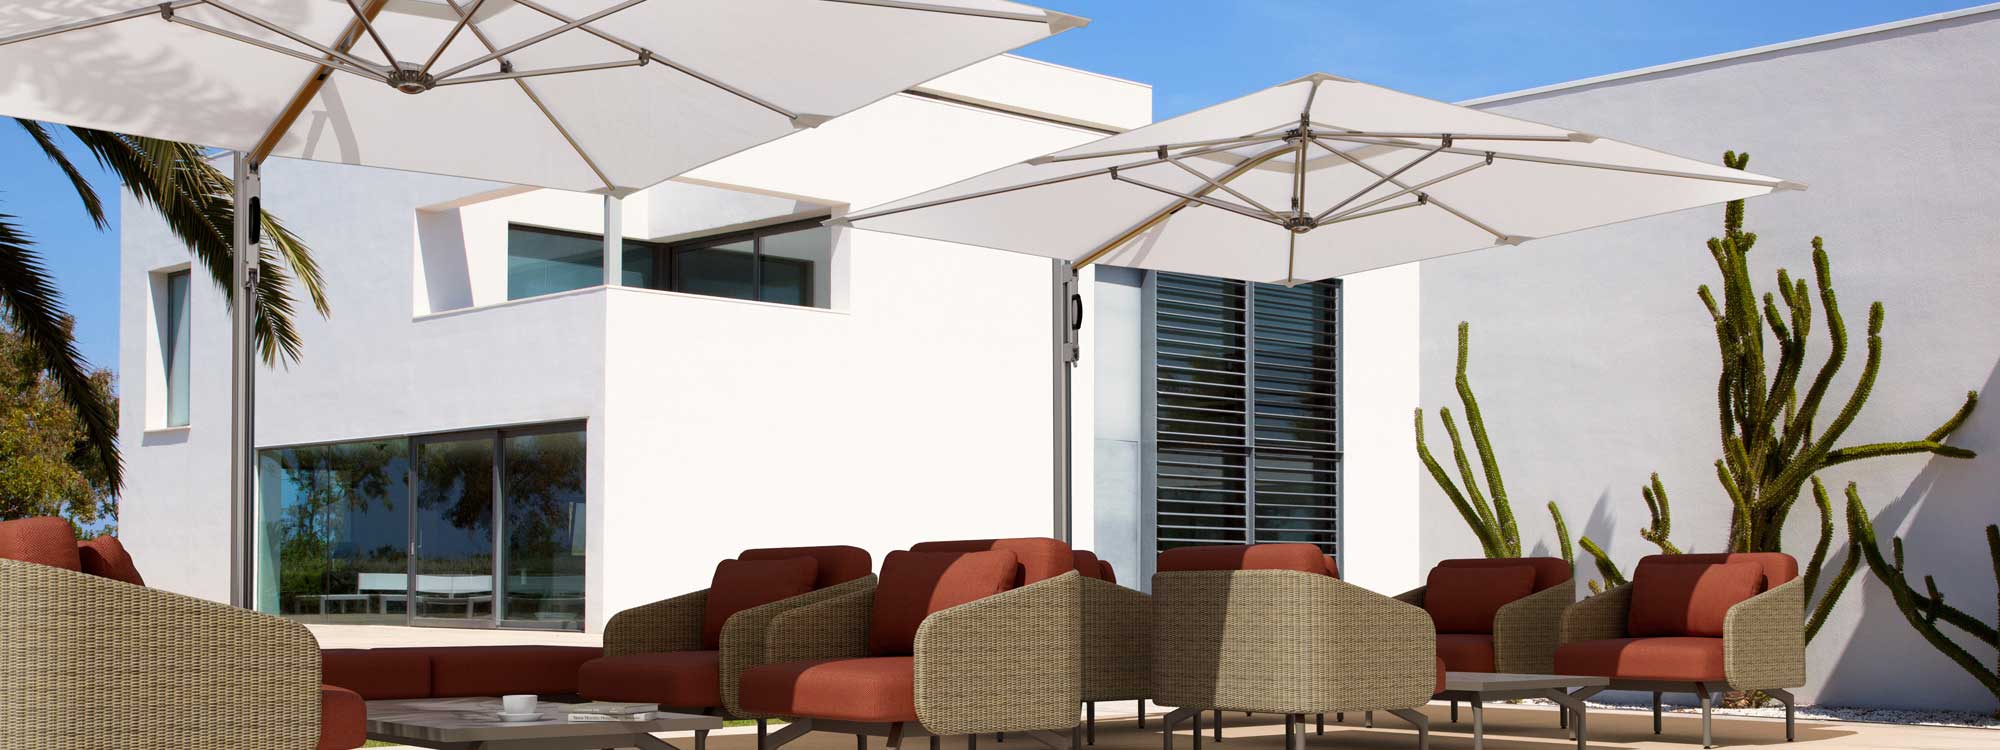 Image of Tuuci Ocean Master white cantilever parasols with polished titanium mast and ribs, with lounge furniture beneath and whitewashed building and large cactus in background